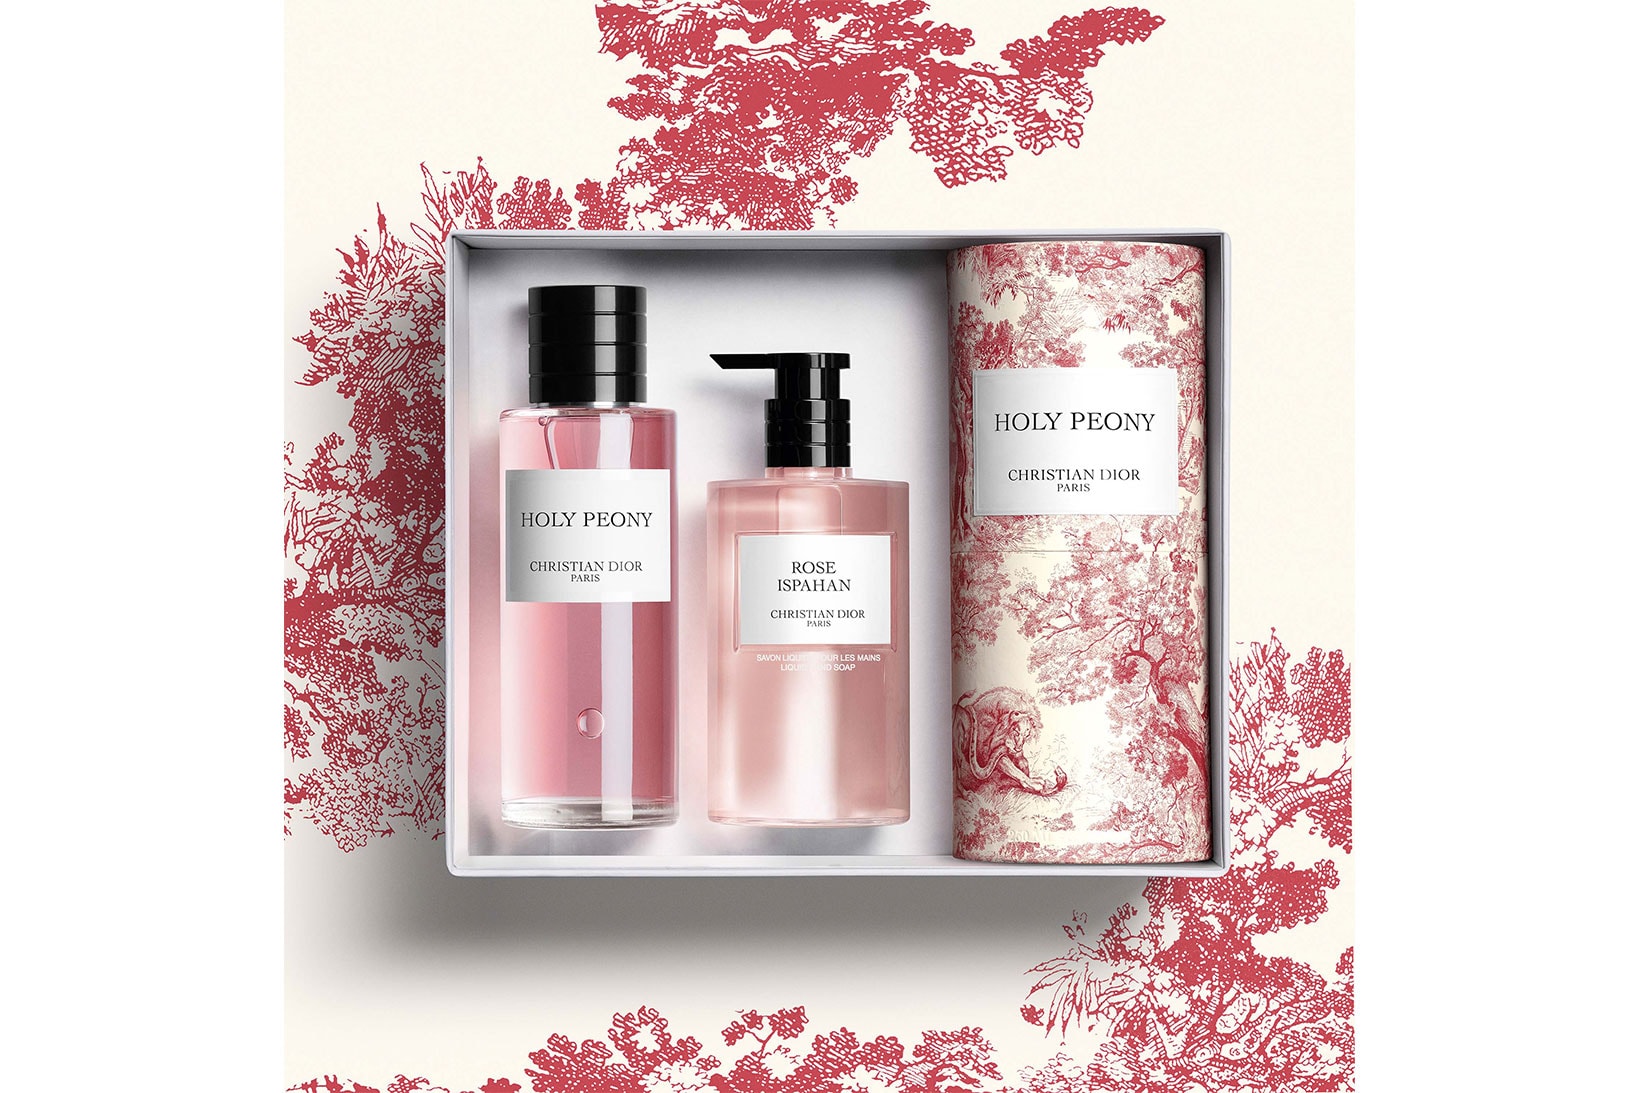 christian dior beauty perfumes fragrances toile de jouy limited edition holy peony pink red osmanthus candles